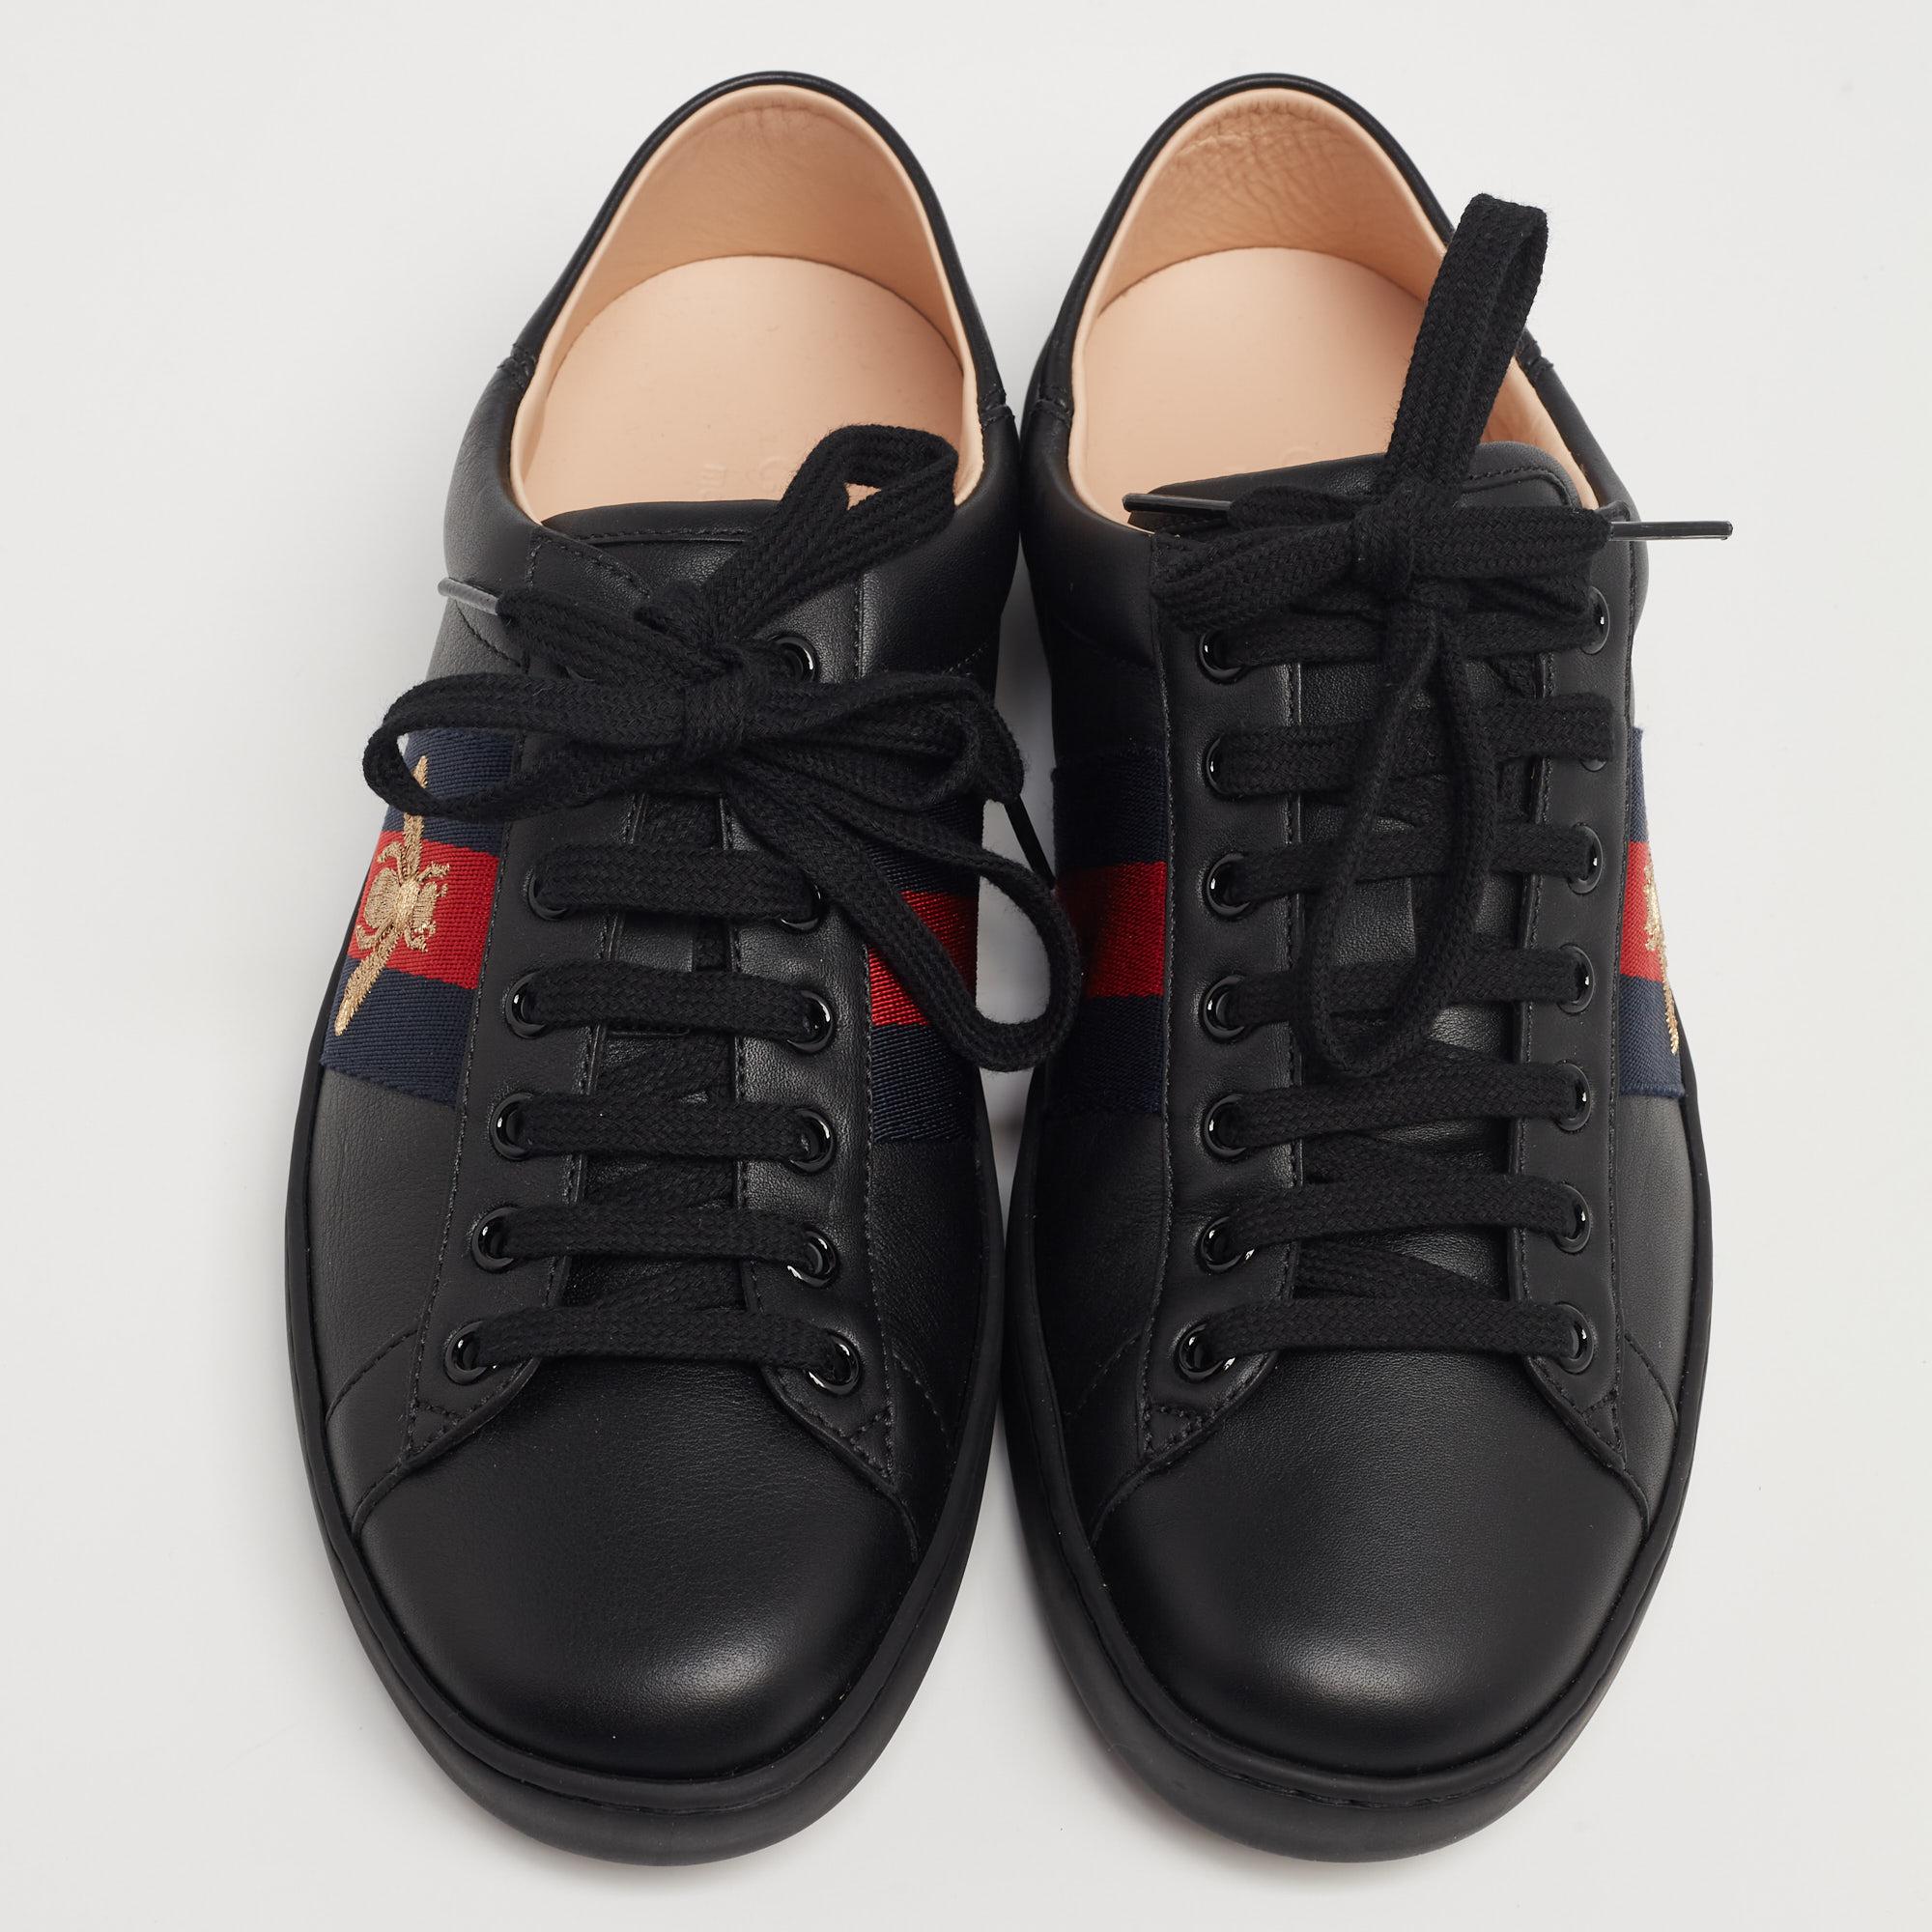 Stacked with signature details, this Gucci pair is made using leather and is designed in a low-top style with lace-up vamps. They have been fashioned with embroidered bee Web stripes on the sides. Complete with comfortable insoles, these shoes can